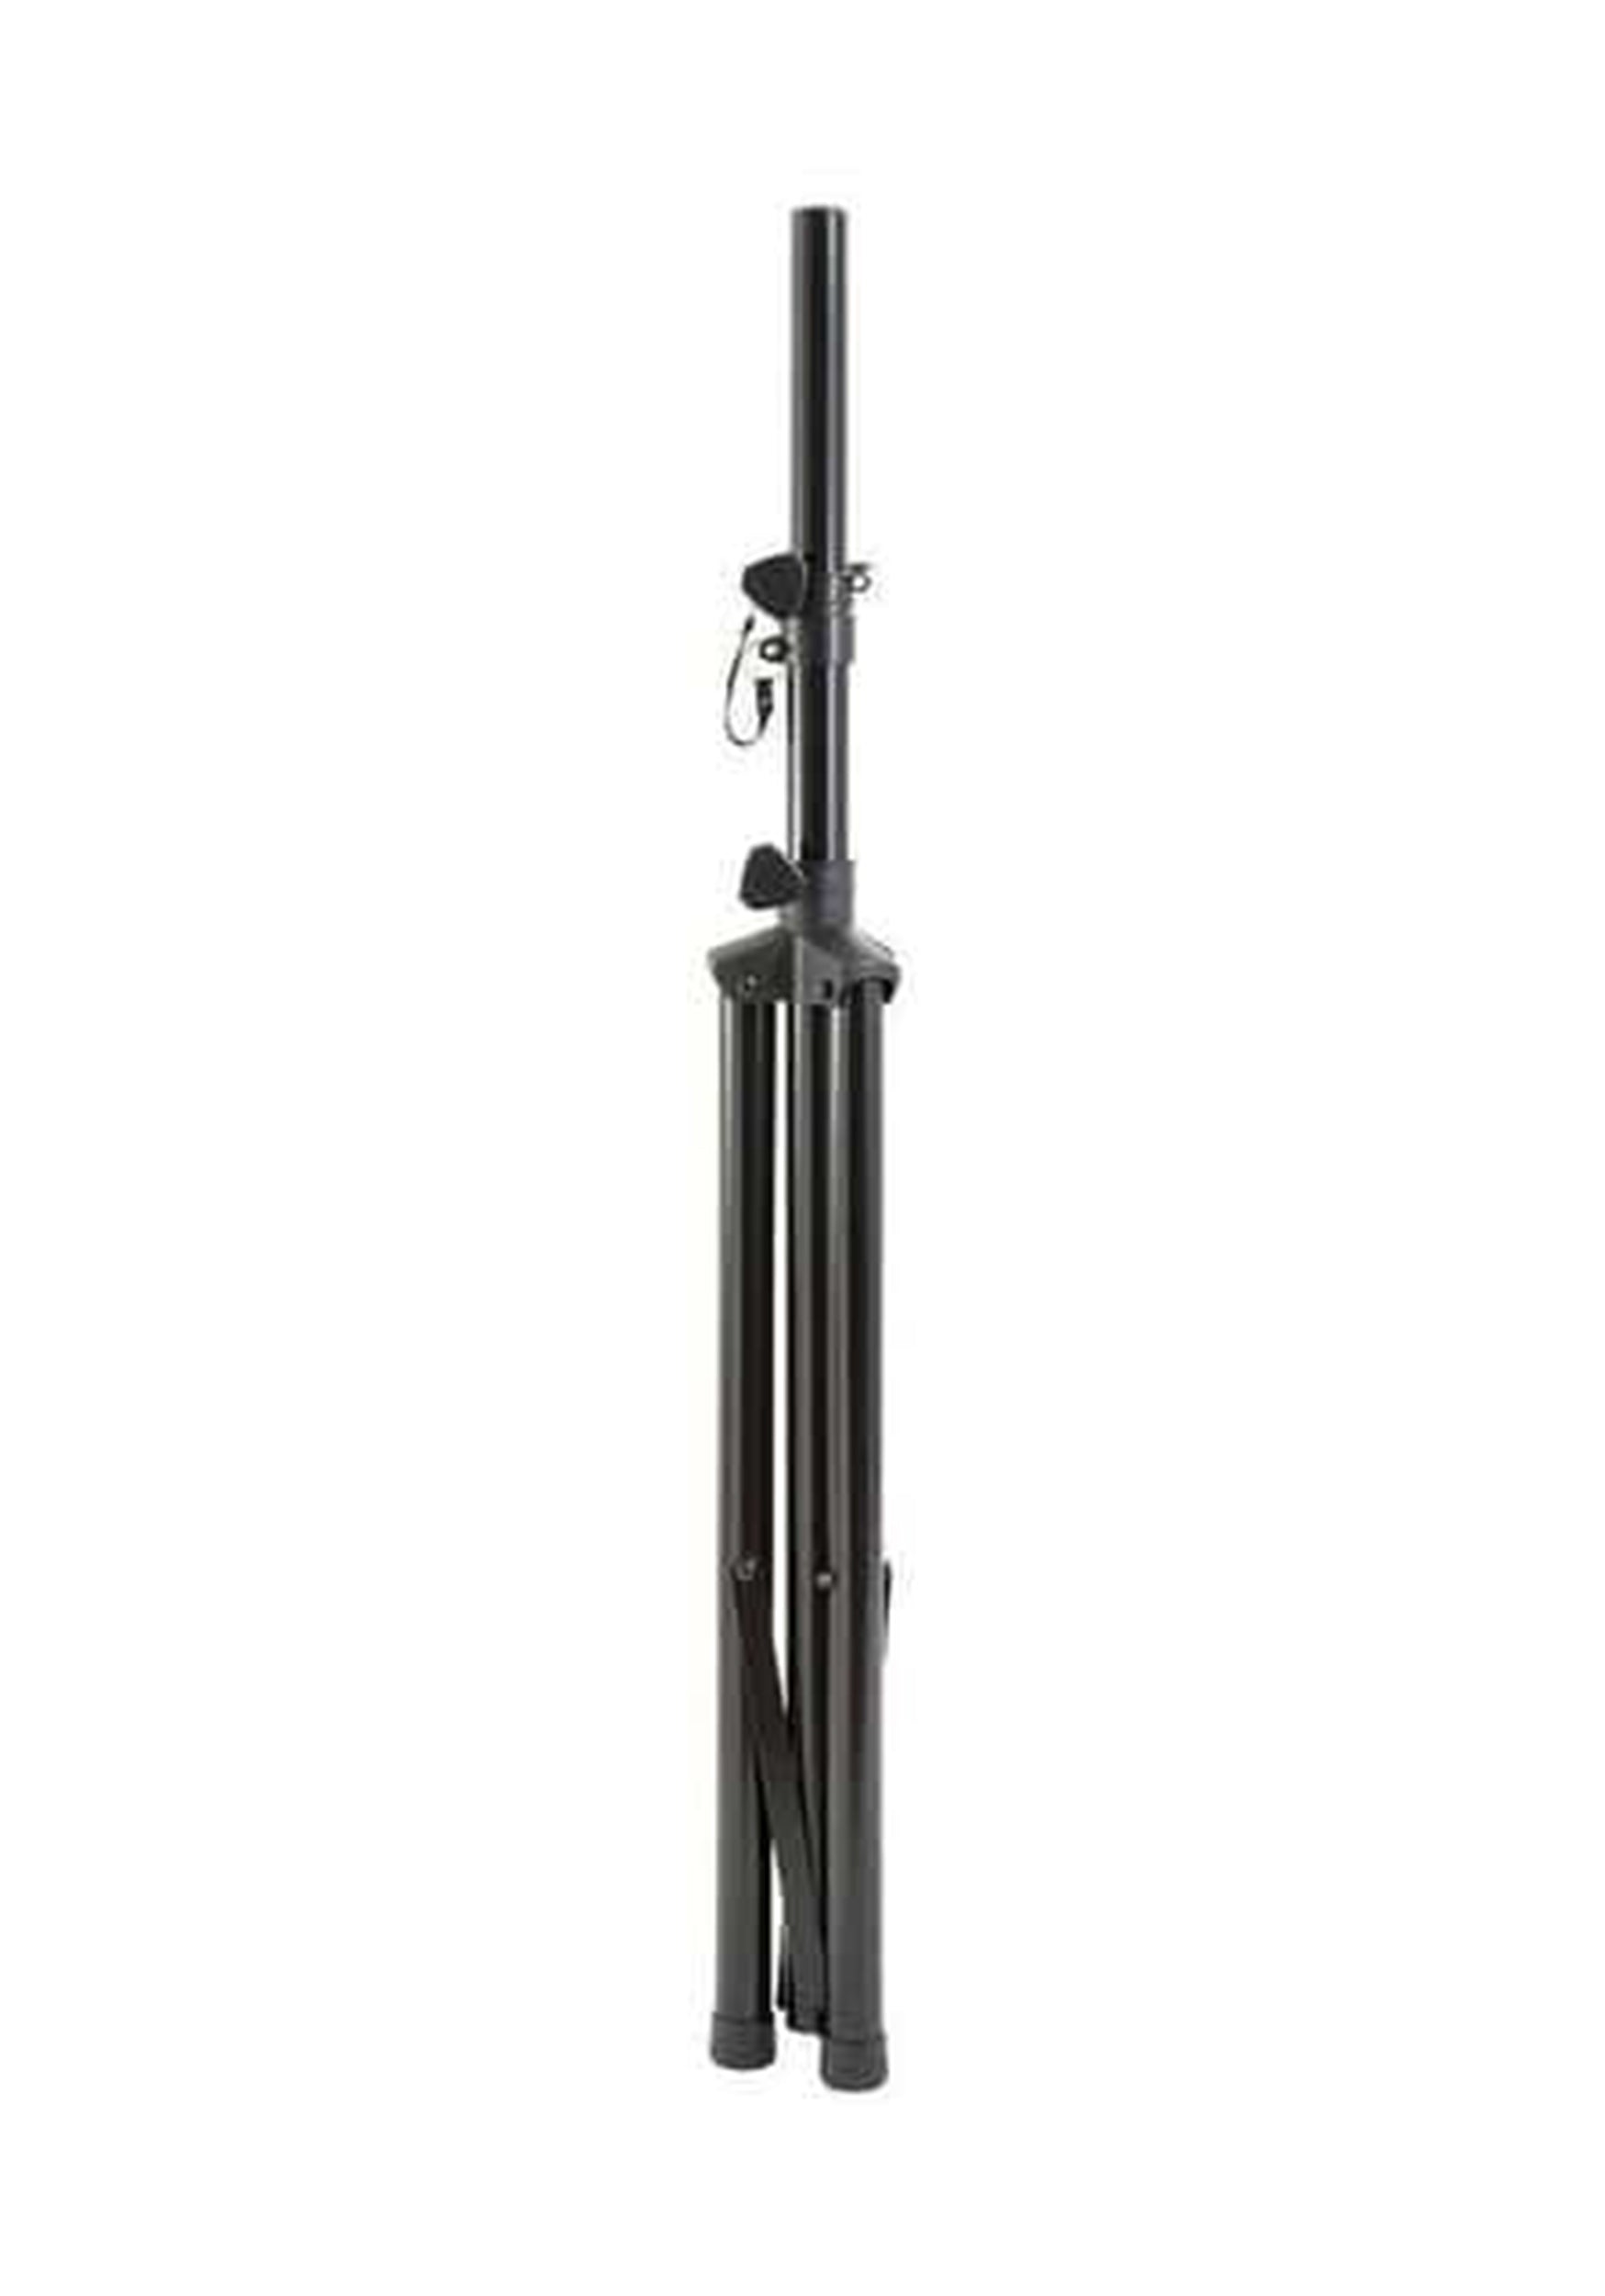 Gemini Sound ST-Pack, 2-Tripod Speaker Stands with Carry Bag - Hollywood DJ